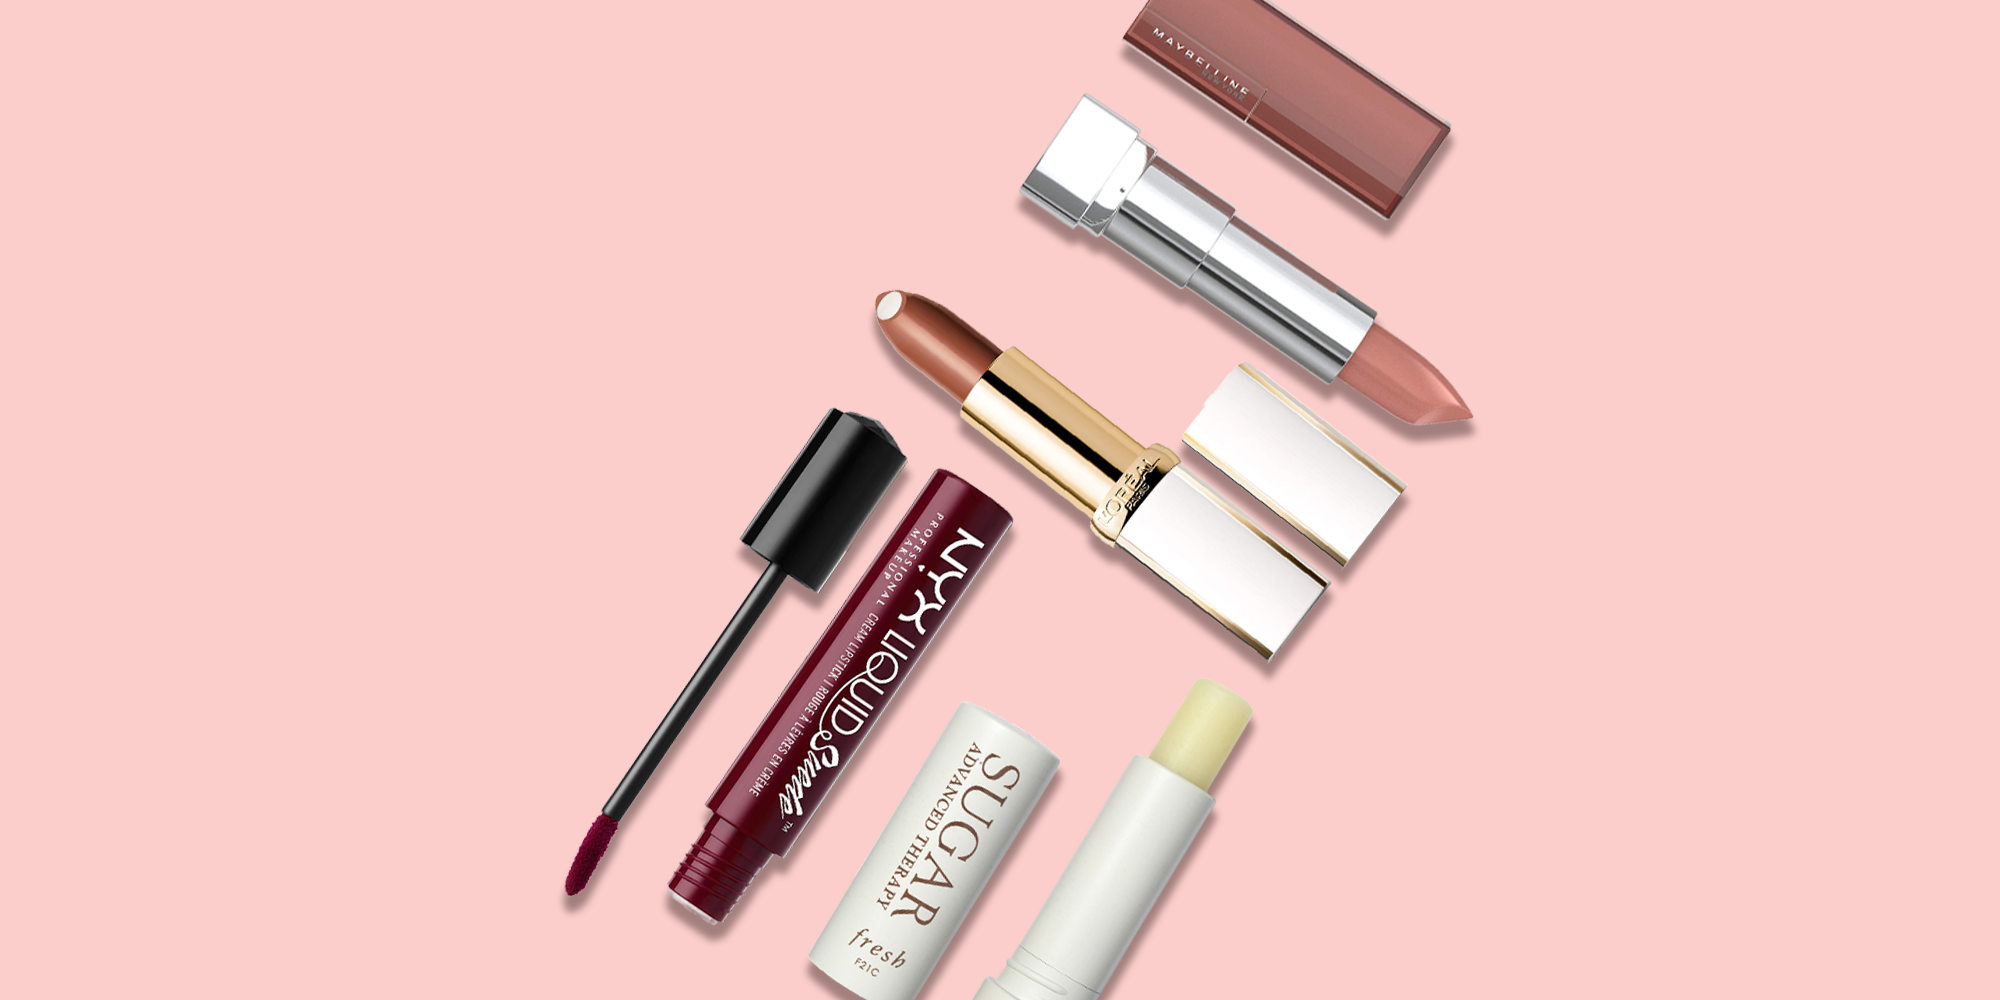 17 Best Lipsticks and Lip Products of 2022 - Top Lip Balm, Gloss & More